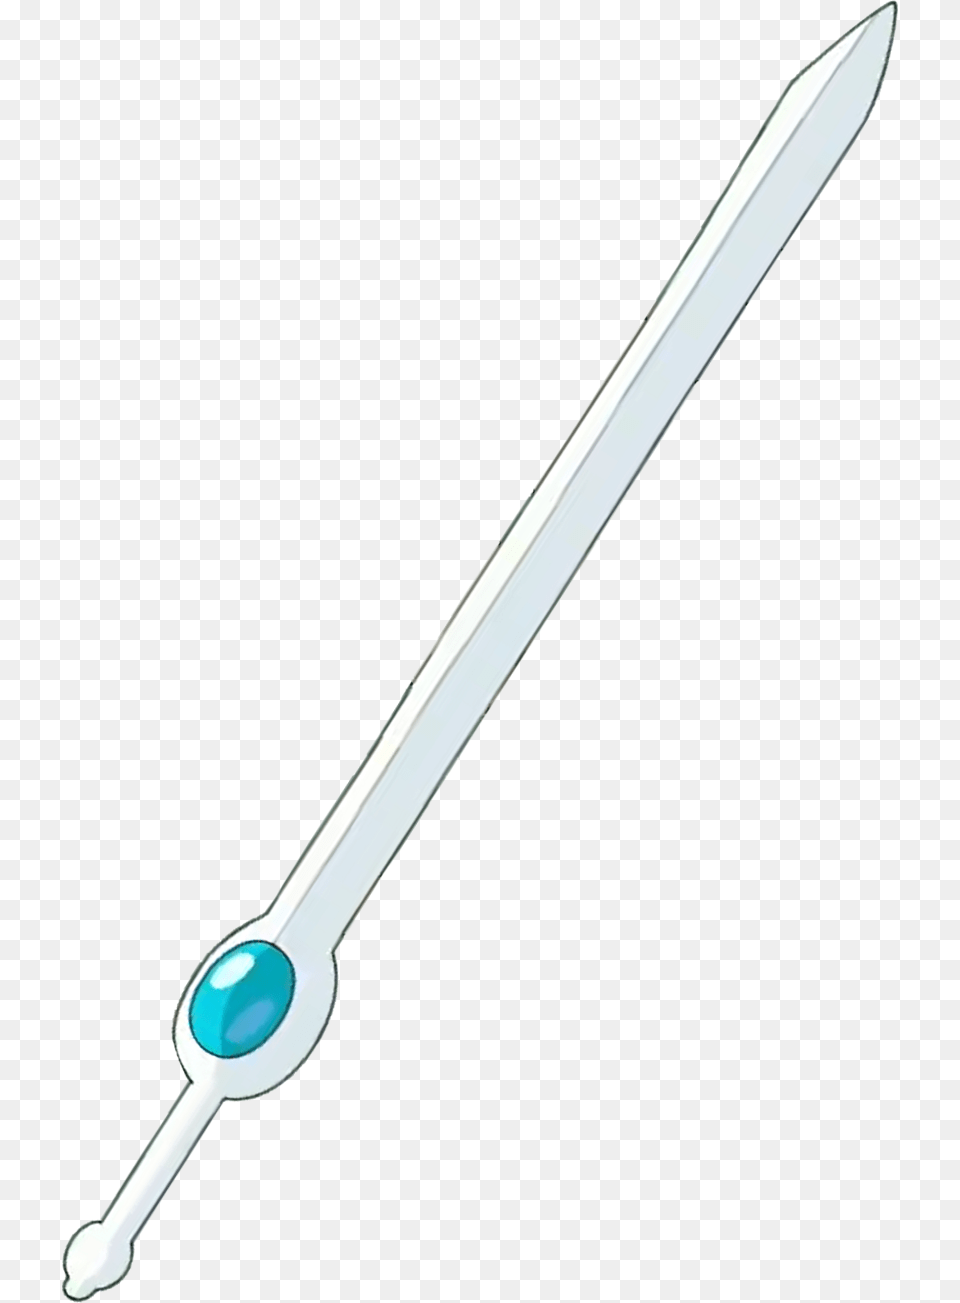 Adventure Time With Finn And Jake Wiki Sword, Brush, Device, Tool, Weapon Png Image